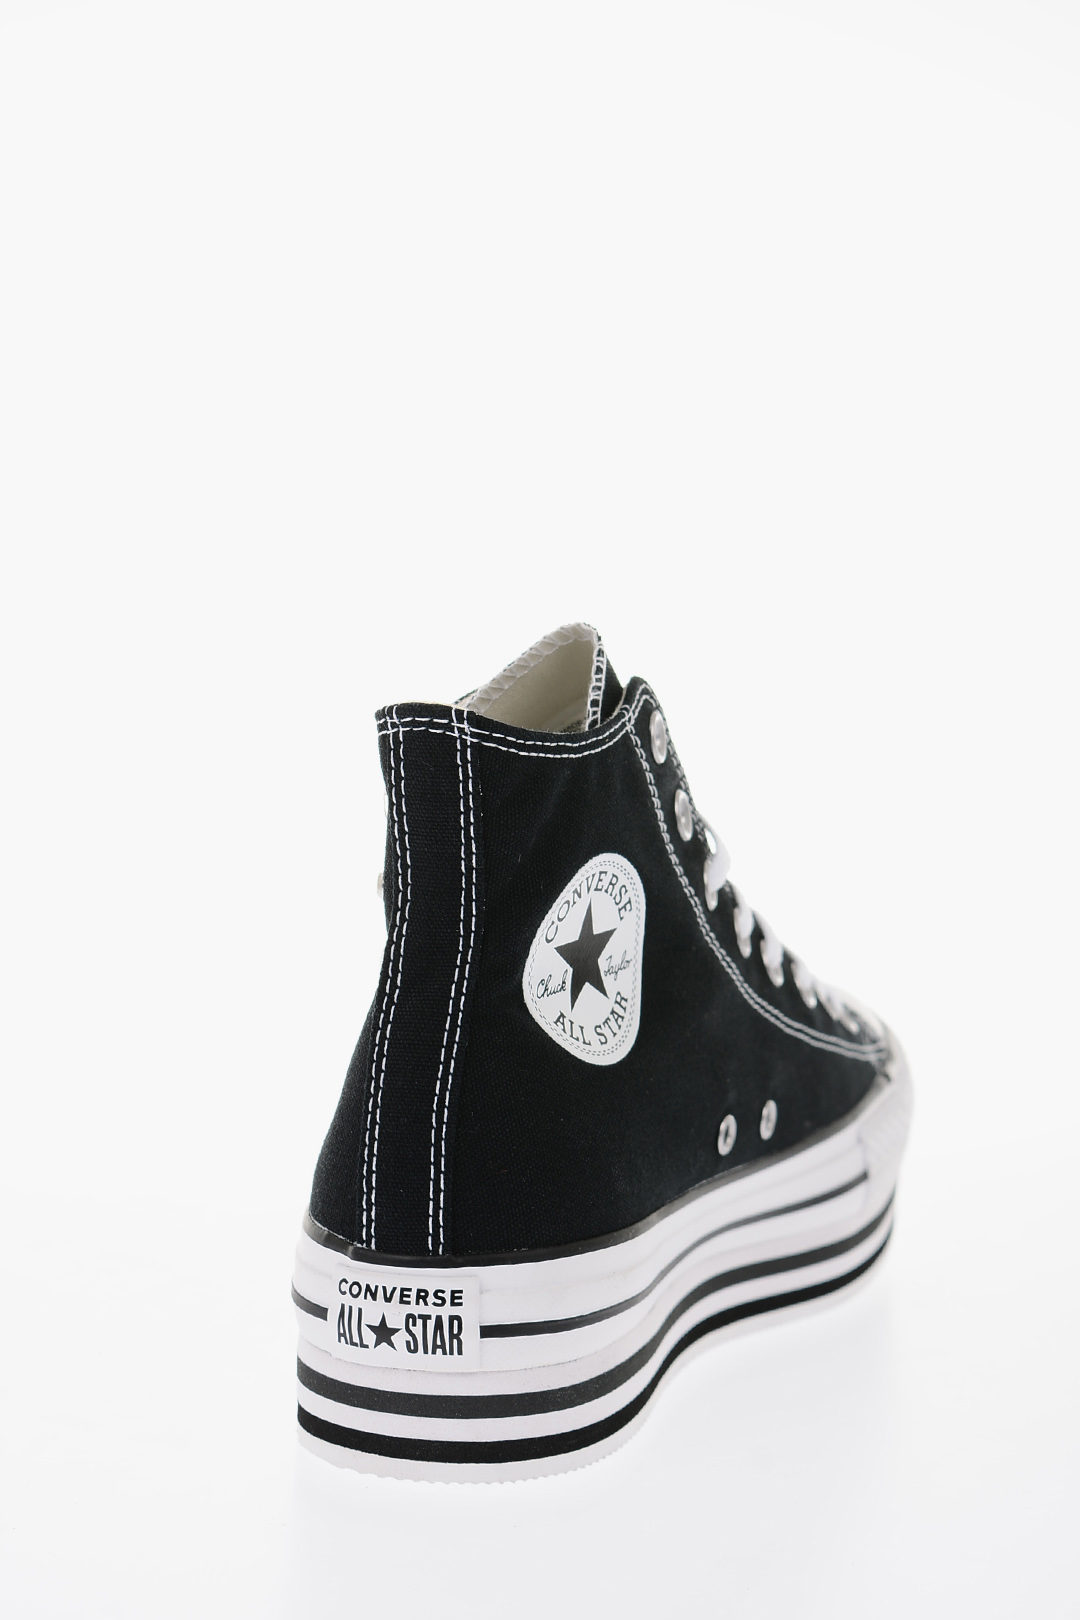 Converse ALL STAR Studded Platform High-Top Sneakers women - Glamood Outlet